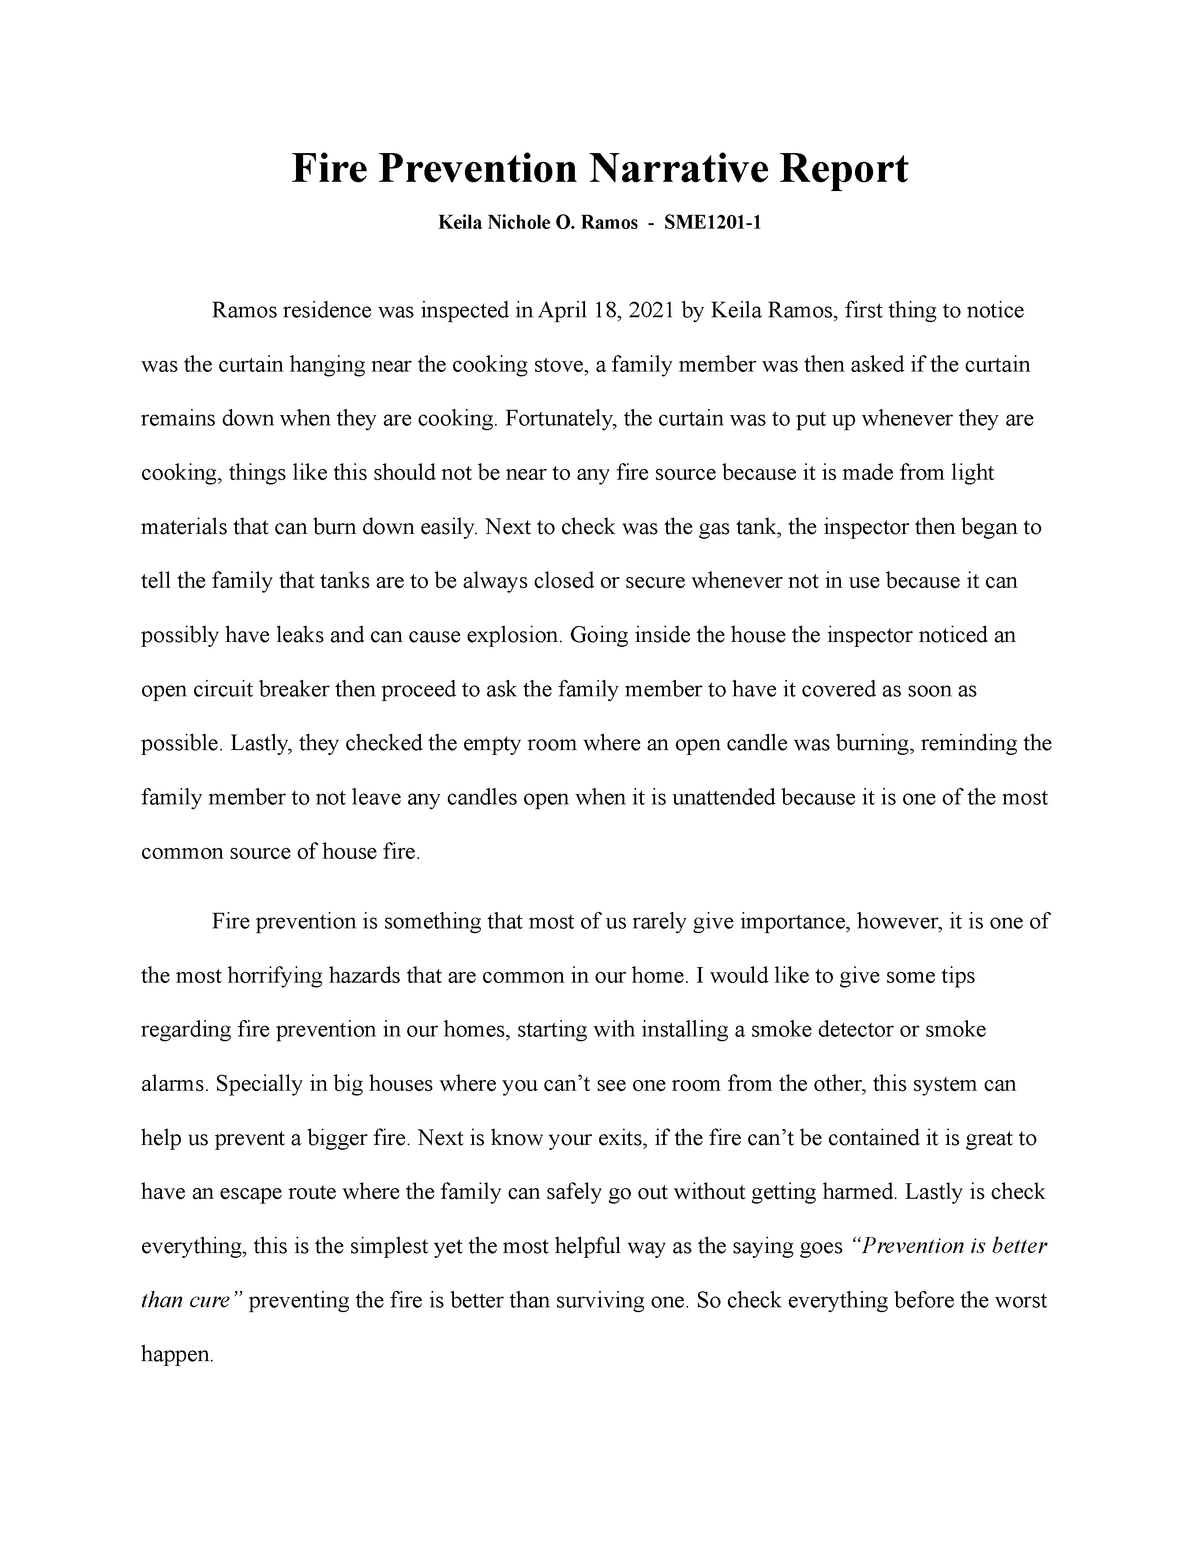 narrative essay about house fire